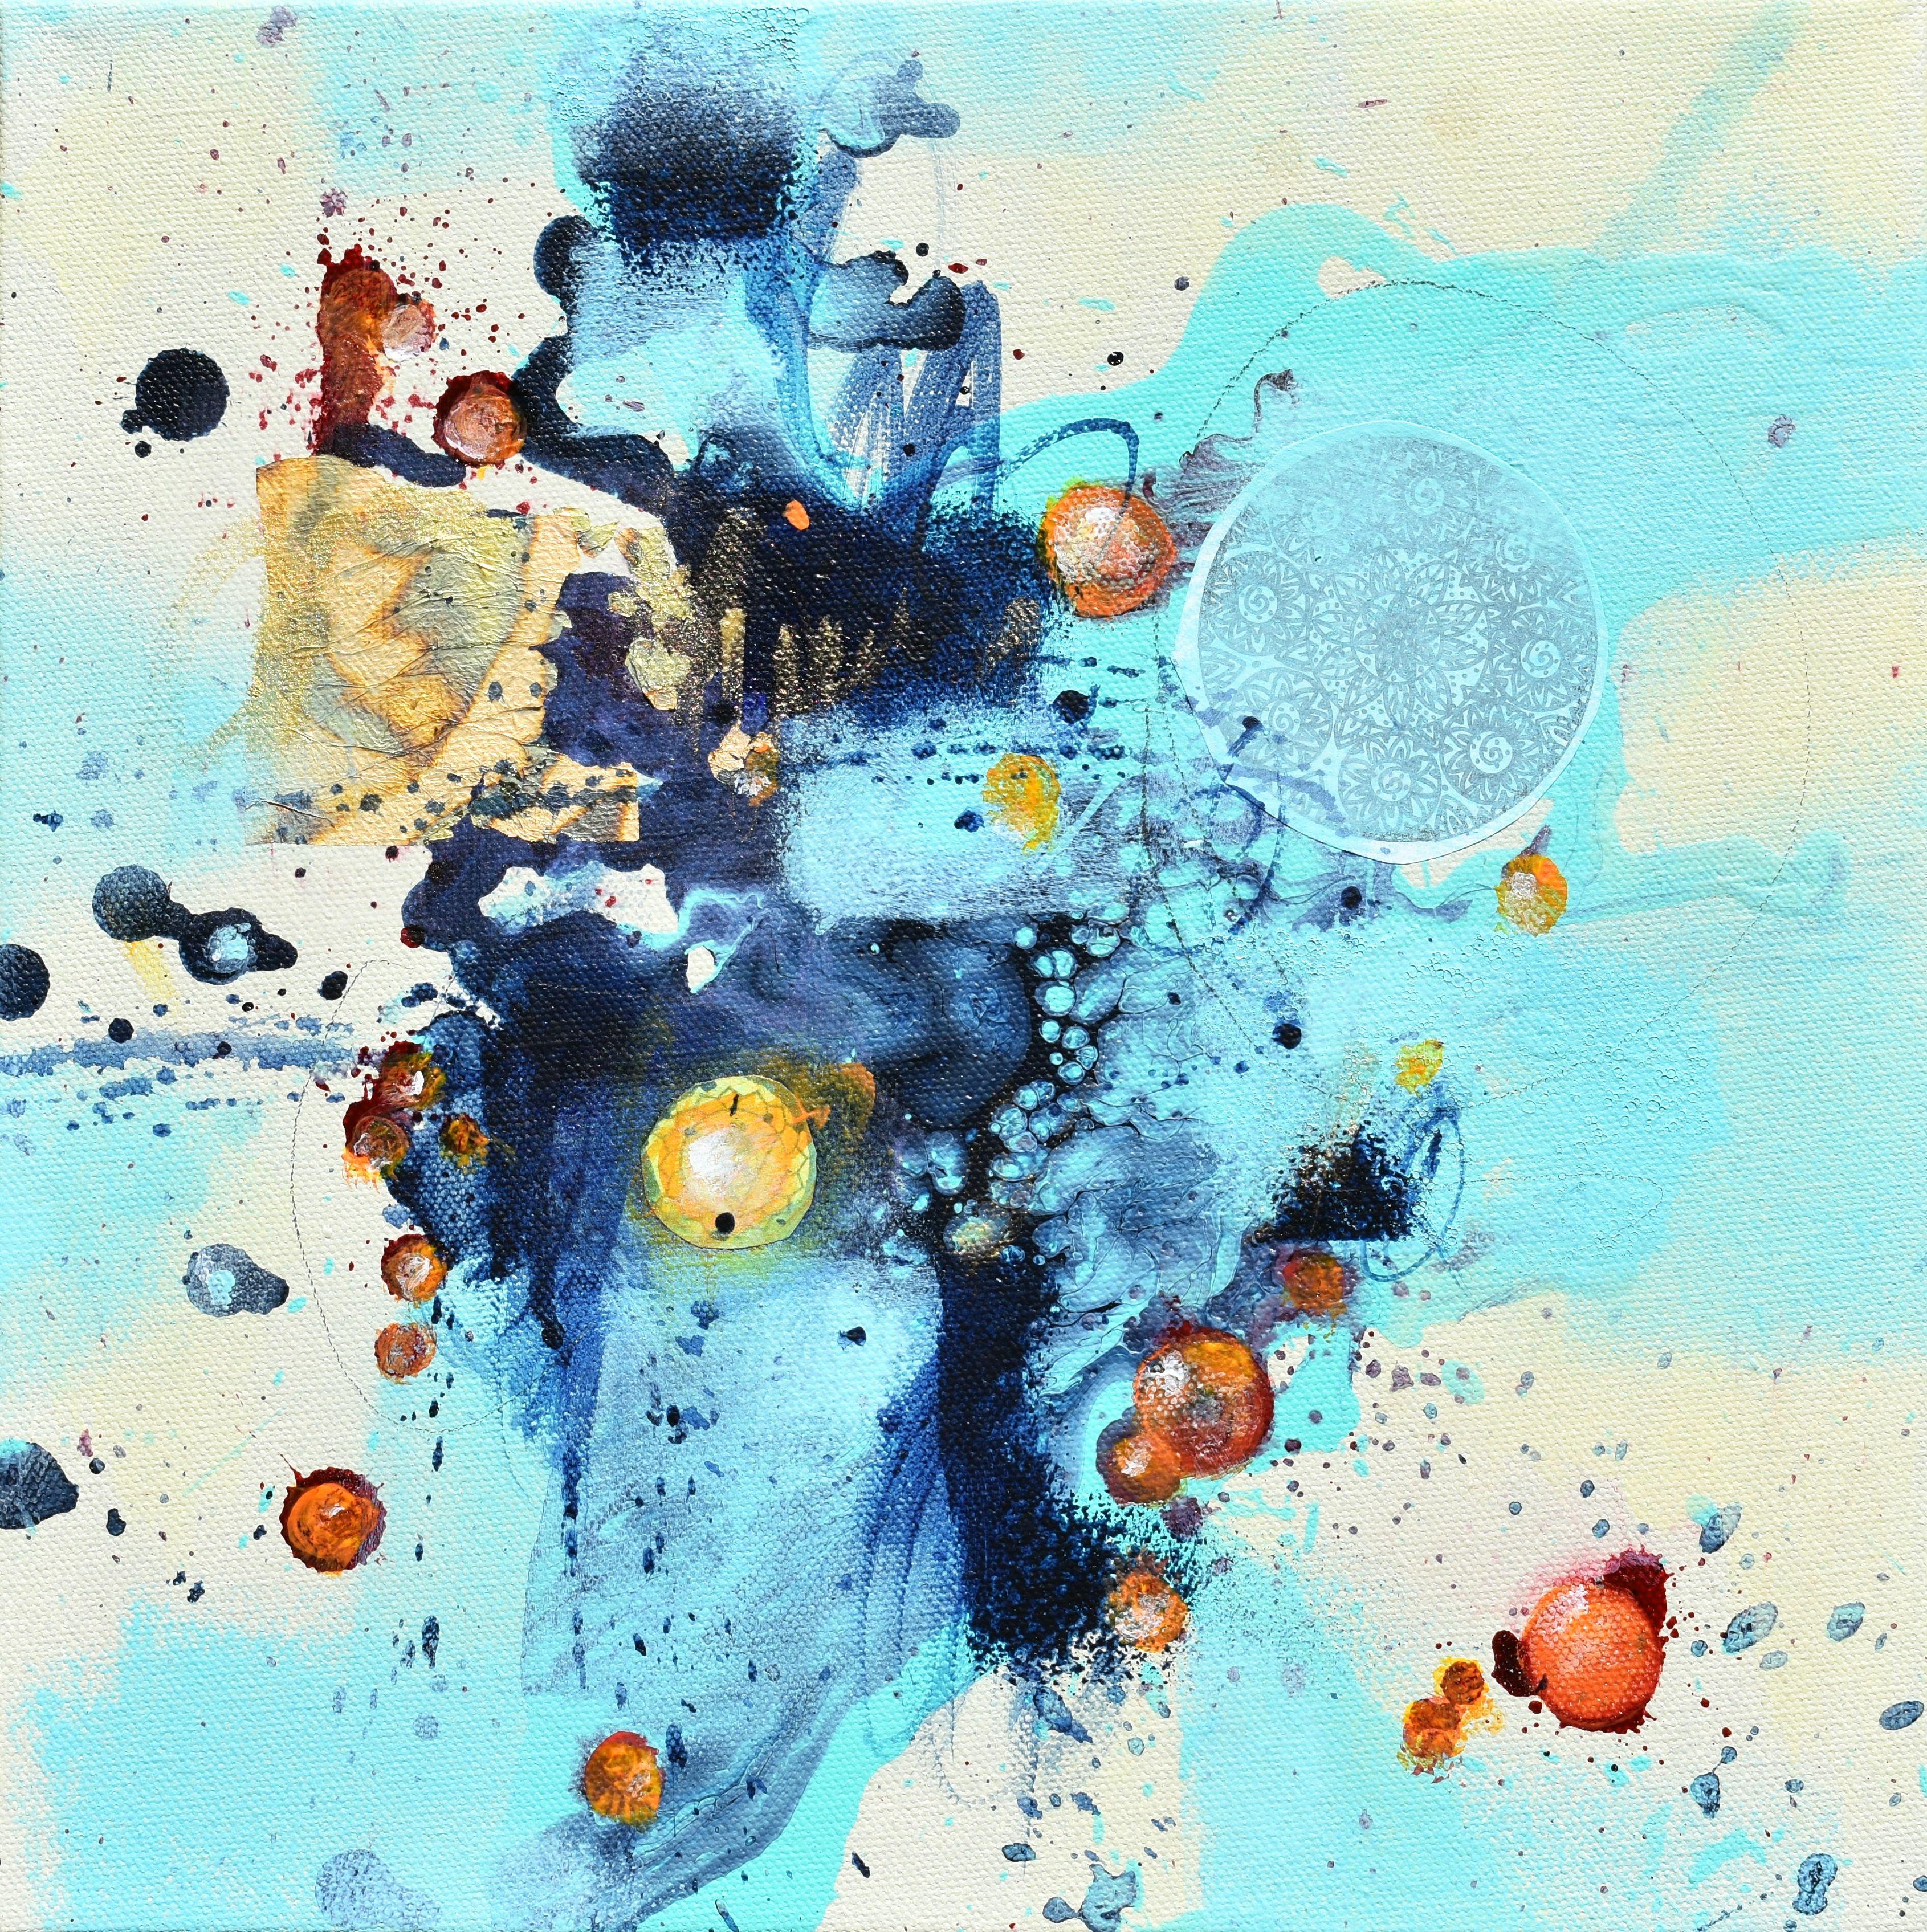 <p>Artist Comments<br>In this flowing abstract, artist Cynthia Ligeros uses acrylic paint by blending it similarly to watercolors. "Although I guide the paint, I also let the colors and shapes develop naturally," says Cynthia. She places a mandala